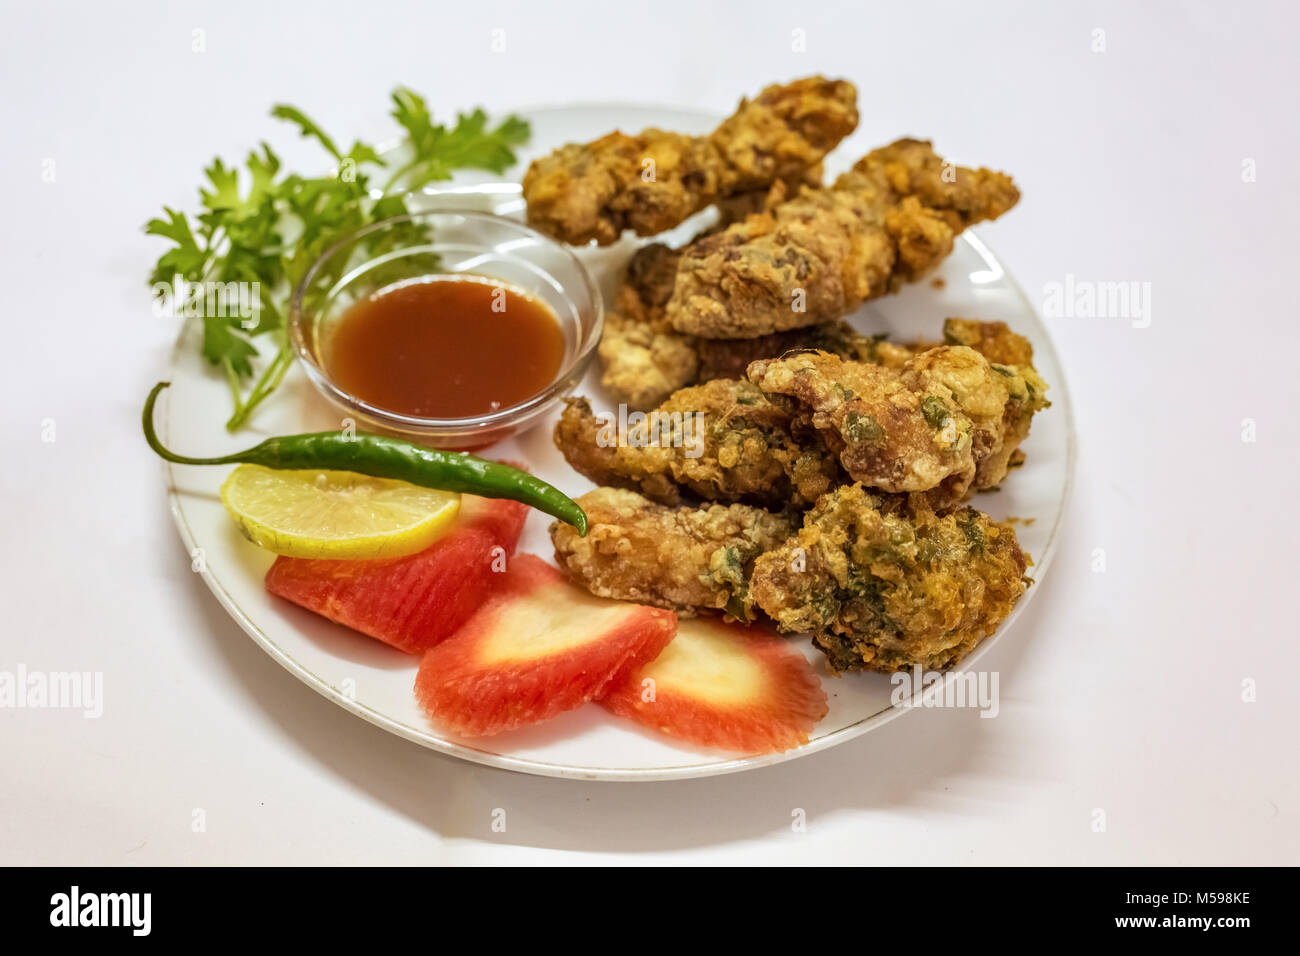 Deep fried spicy chicken pakora served with tomato sauce and sliced carrot lemon with coriander leaf with green chili. A popular Indian starter dish. Stock Photo